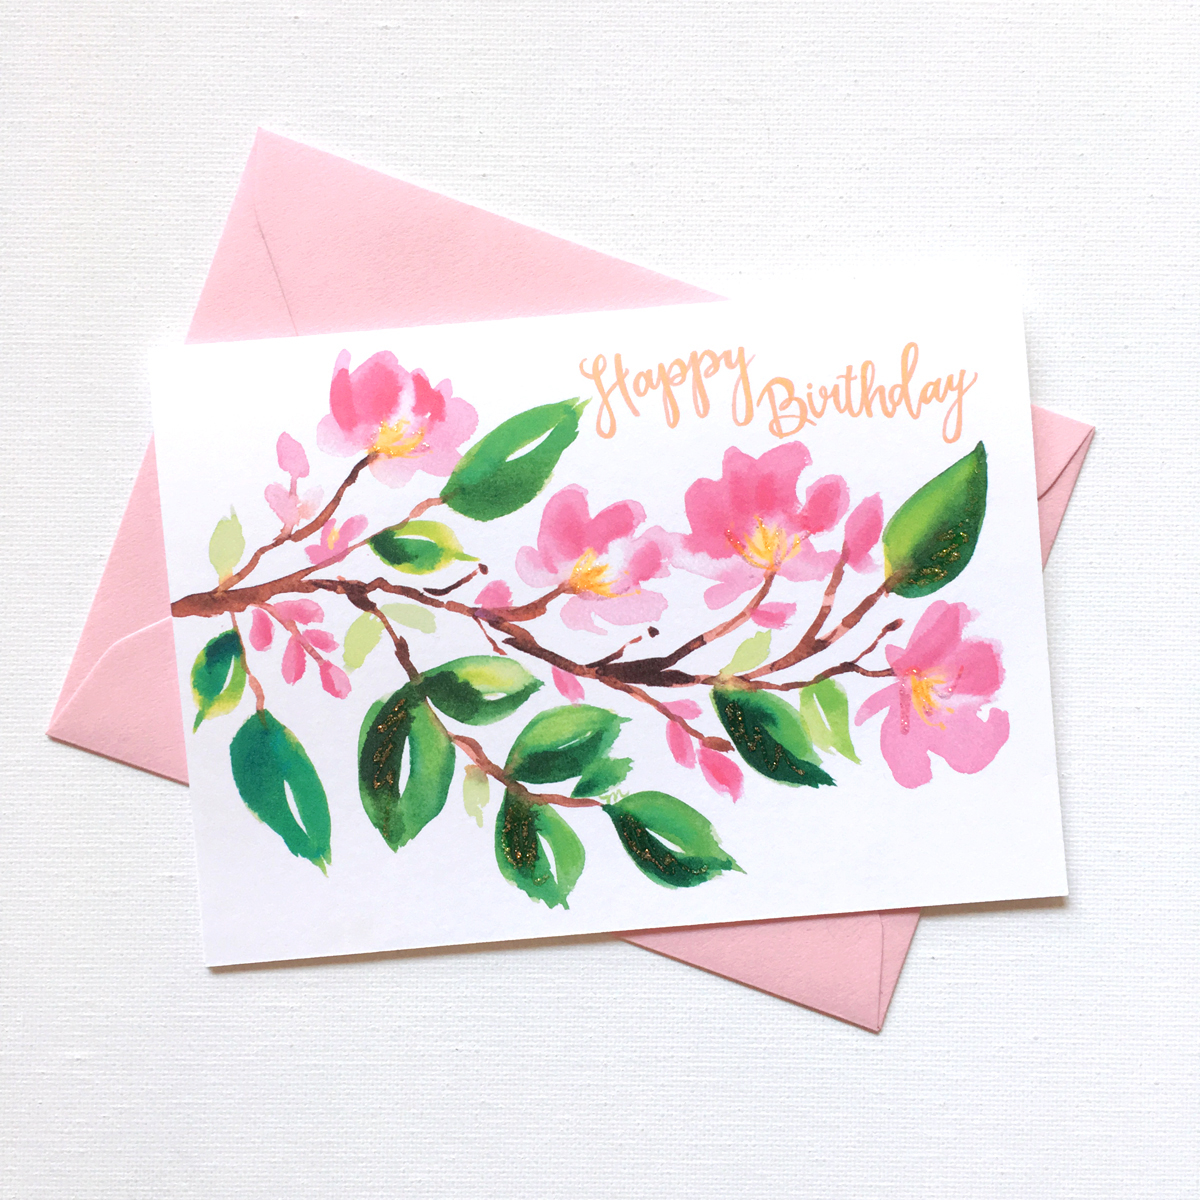 Handmade Birthday Card Ideas Watercolor Birthday Card Ideas At Getdrawings Free For